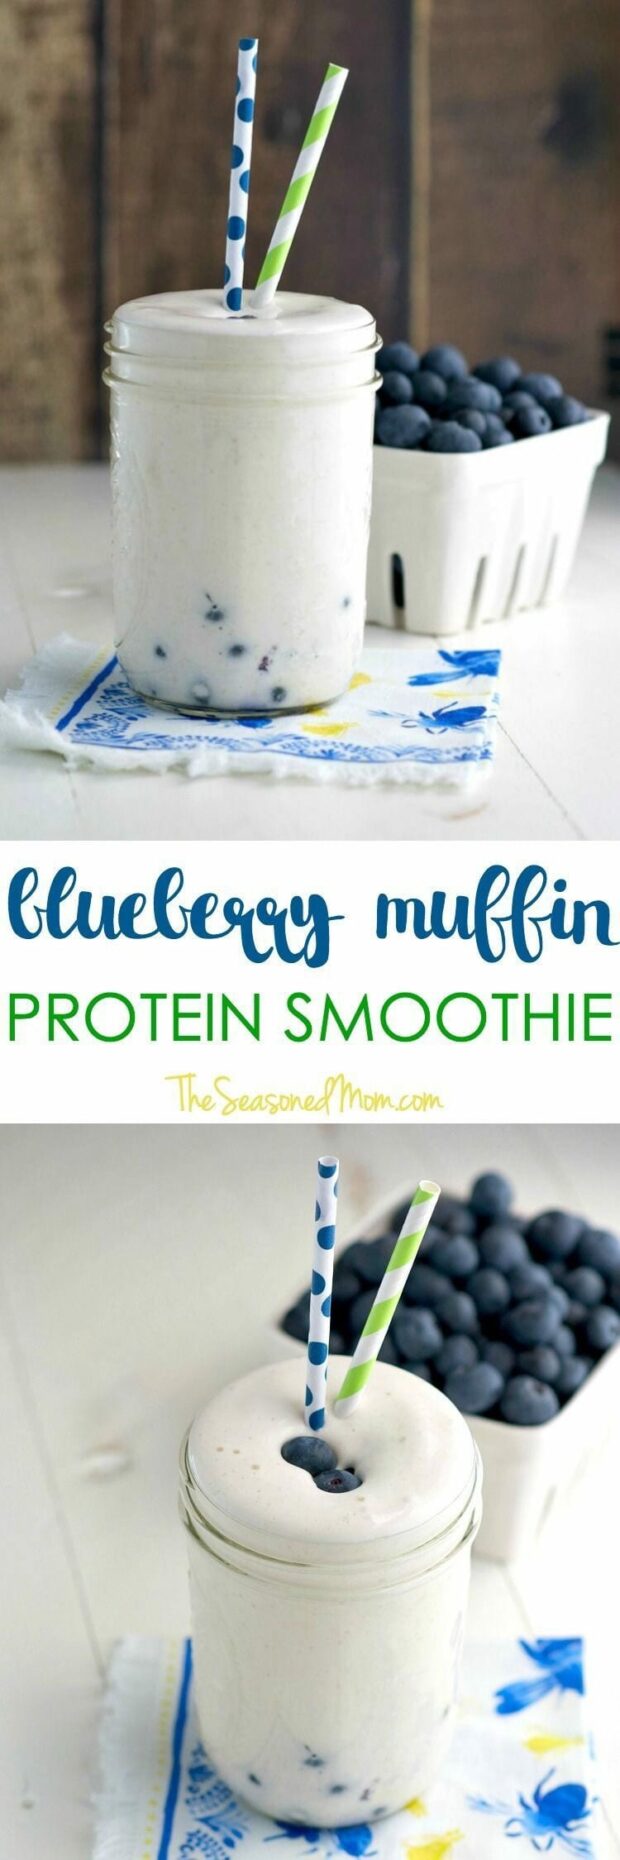 12 Perfect Post-Workout Protein Smoothies (Part 2) - Post-Workout Smoothies, Post-Workout Protein Smoothies, Post-Workout Protein